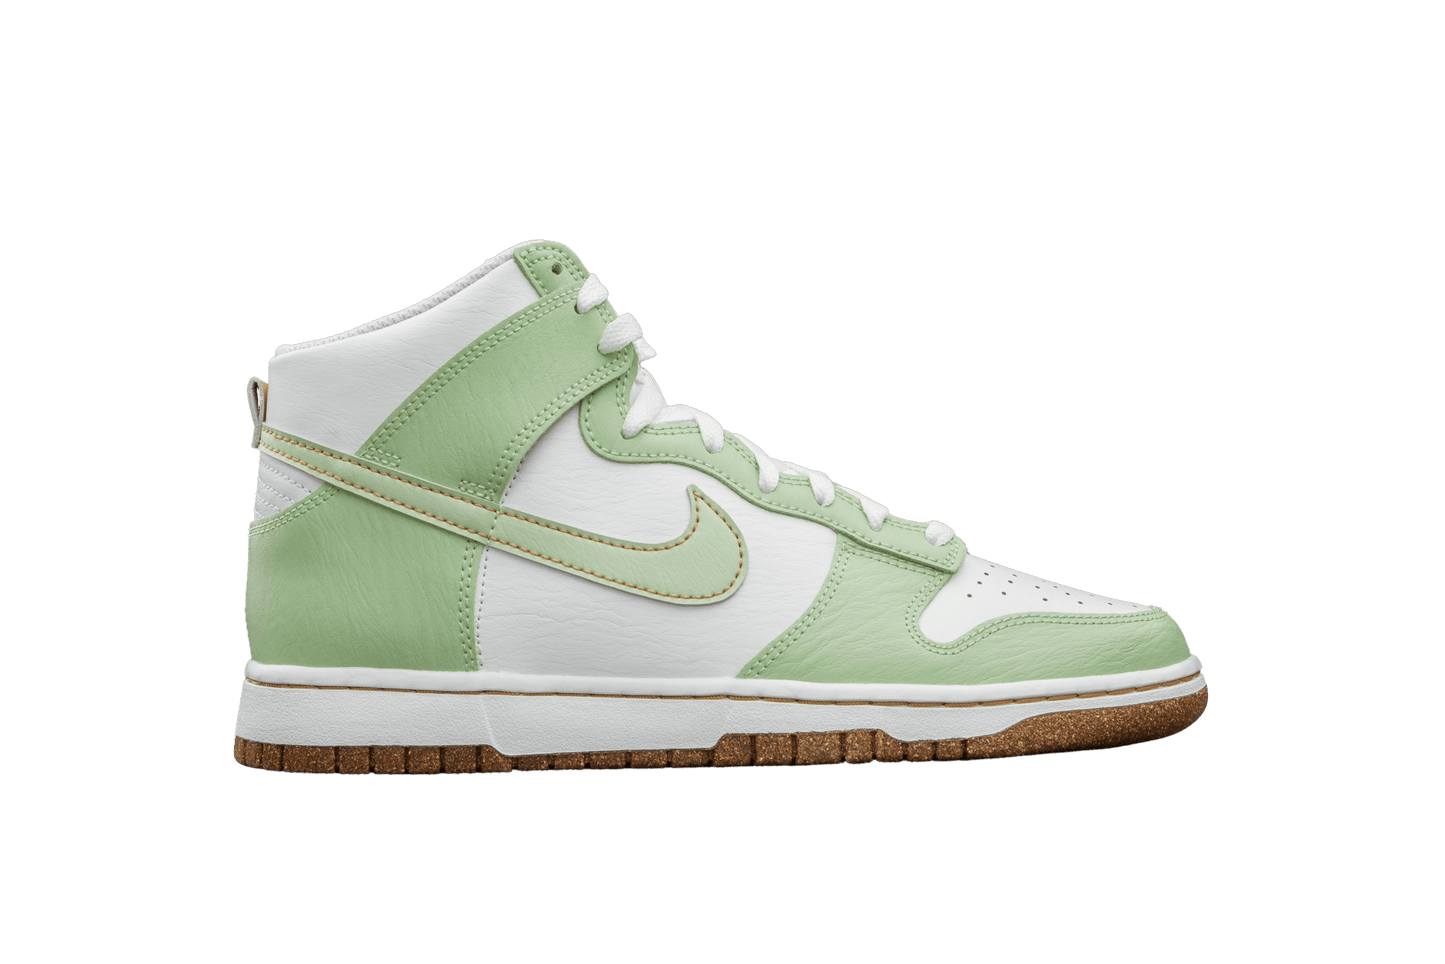 nike dunk high se inspected by swoosh honeydew lo10m 1 1445x